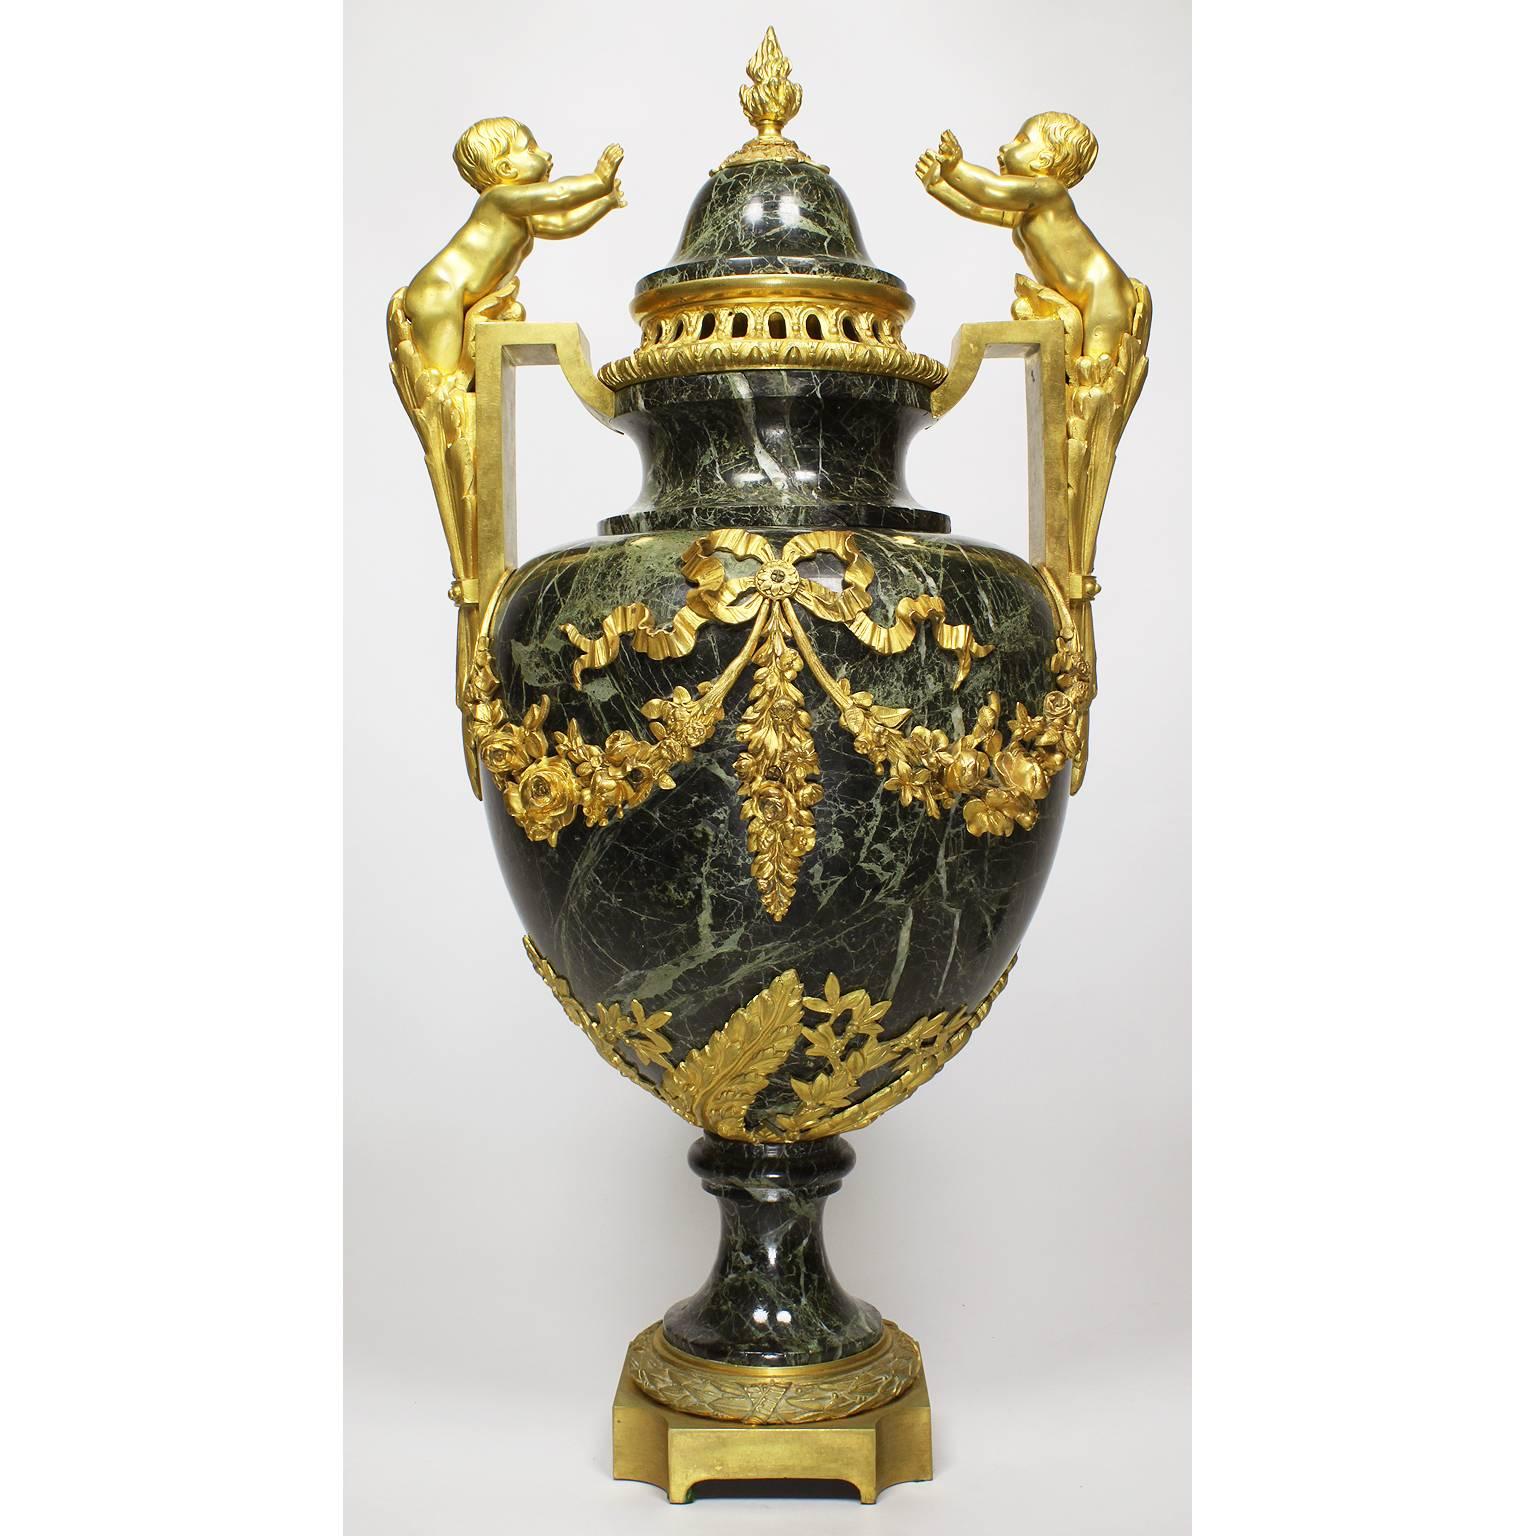 French Pair of 19th-20th Century Louis XVI Style Ormolu and Marble Urns with Children